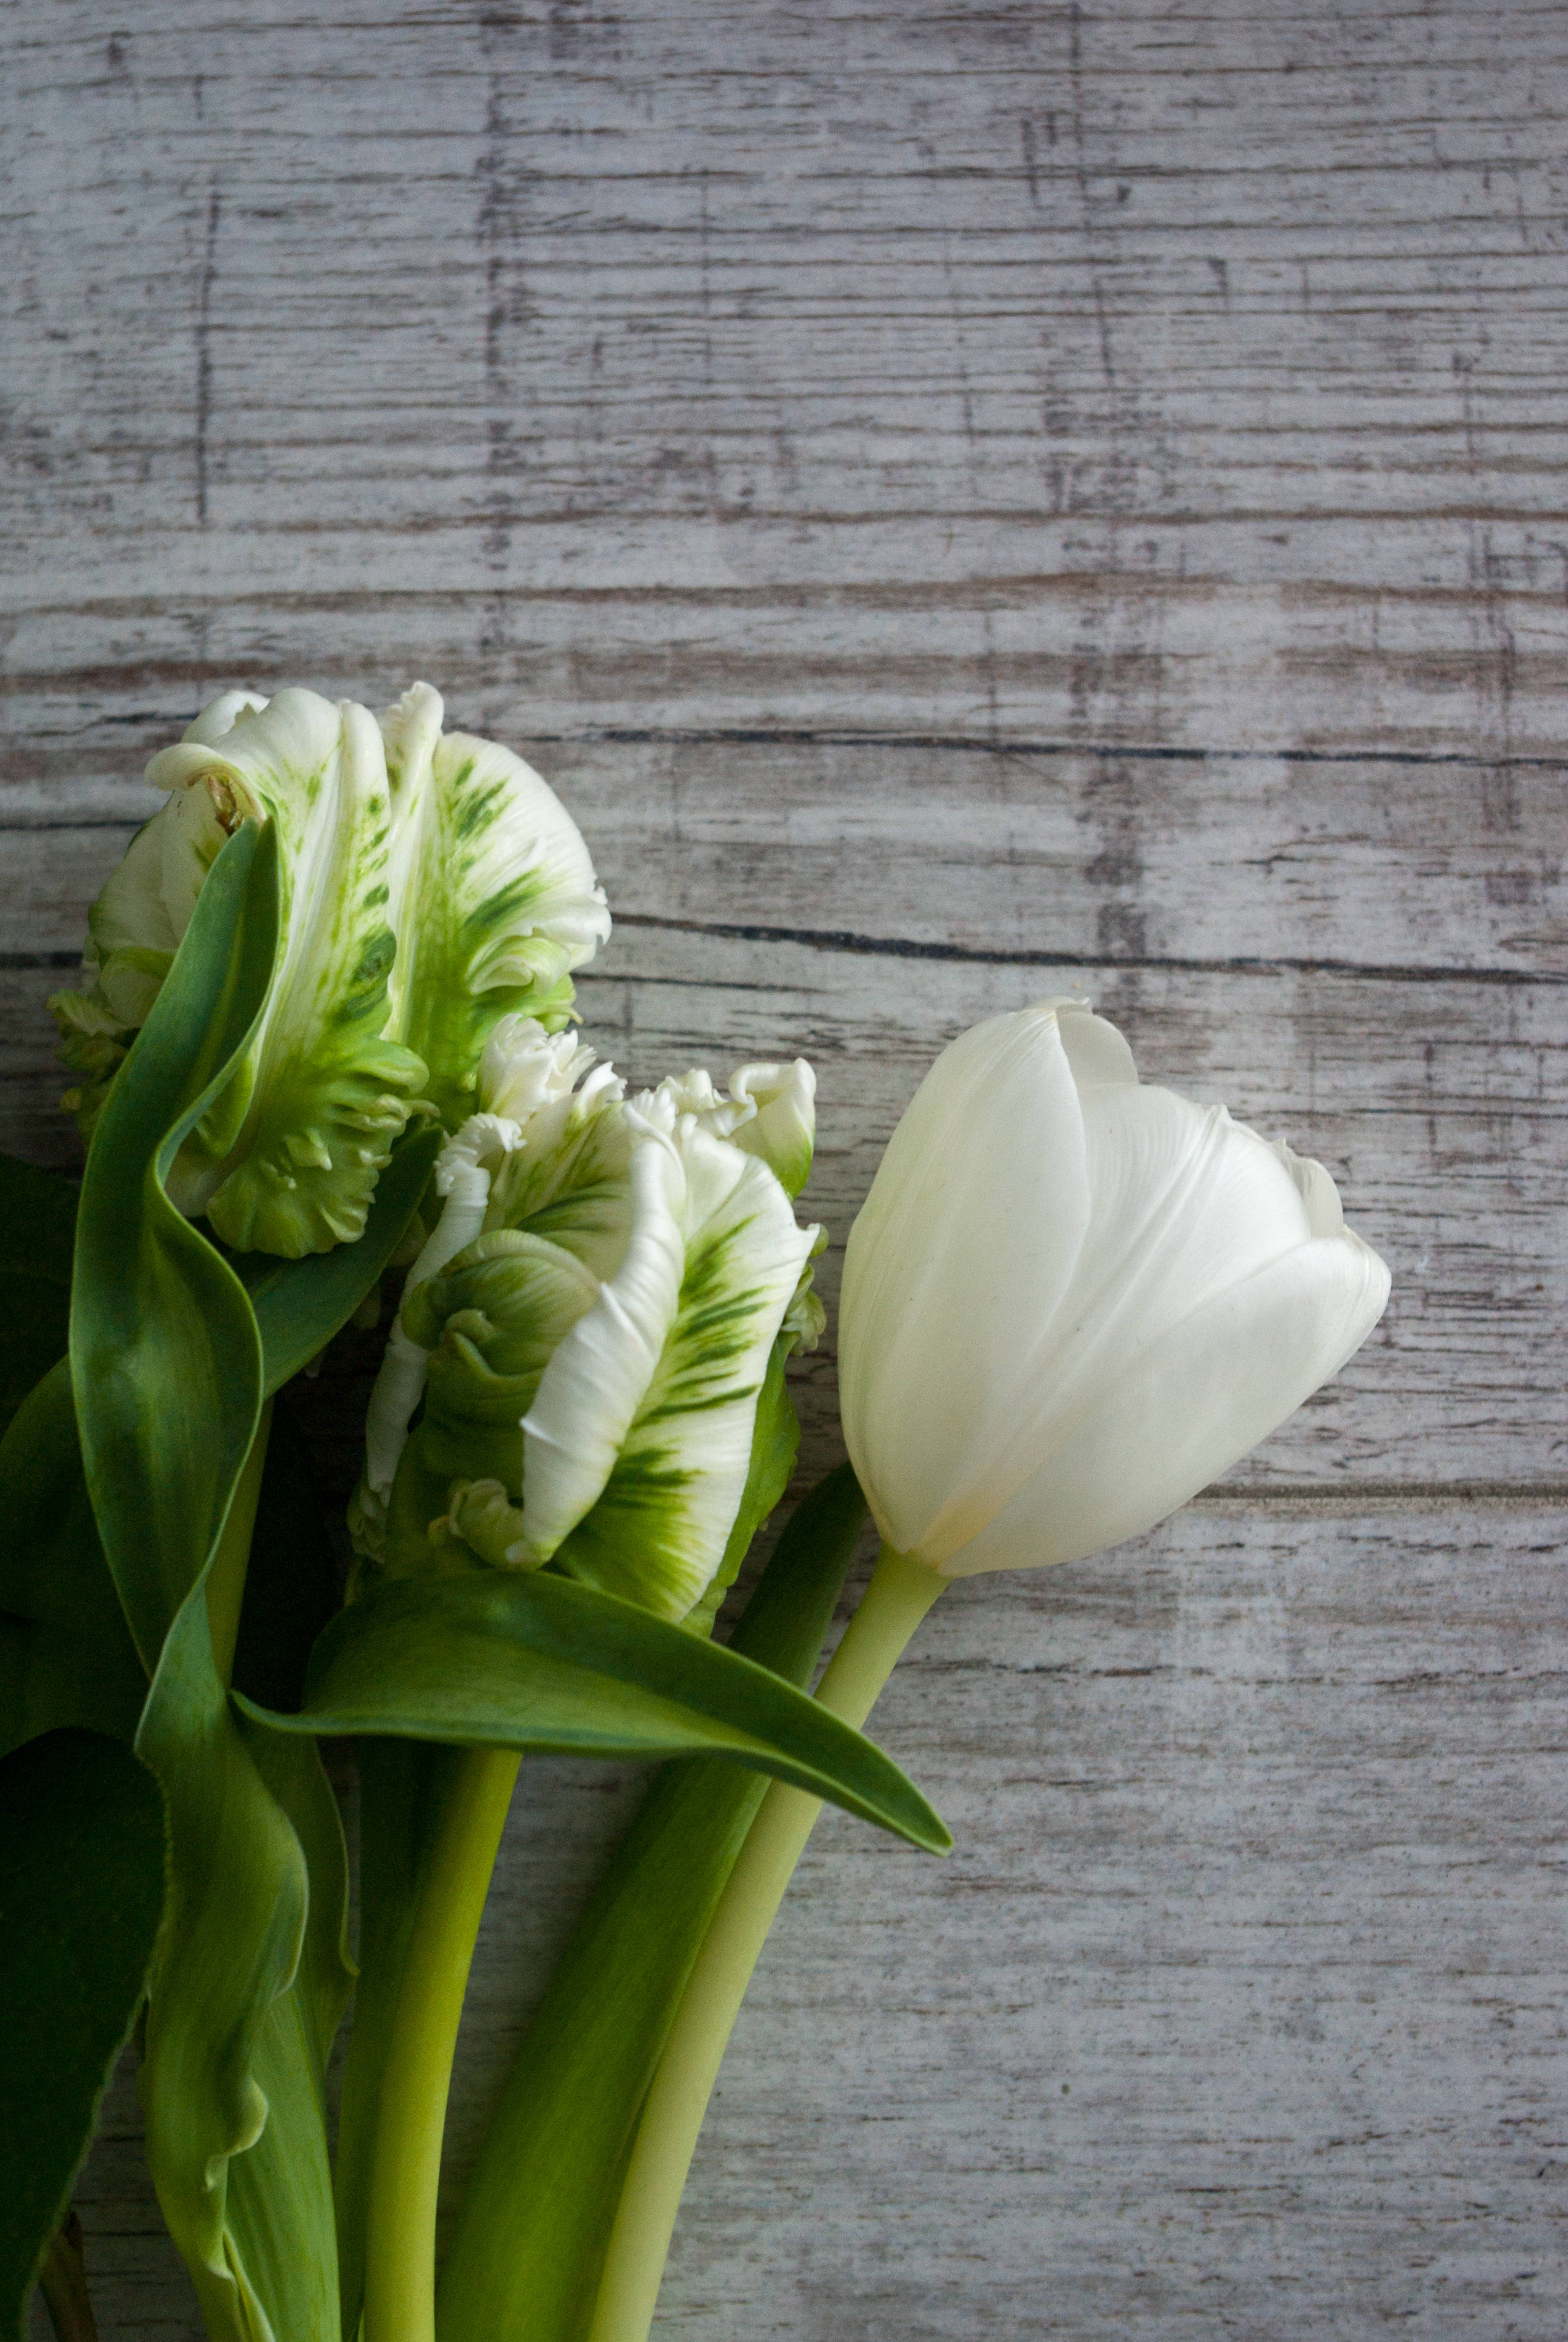 A bunch of white tulips on a wooden table - Tulip